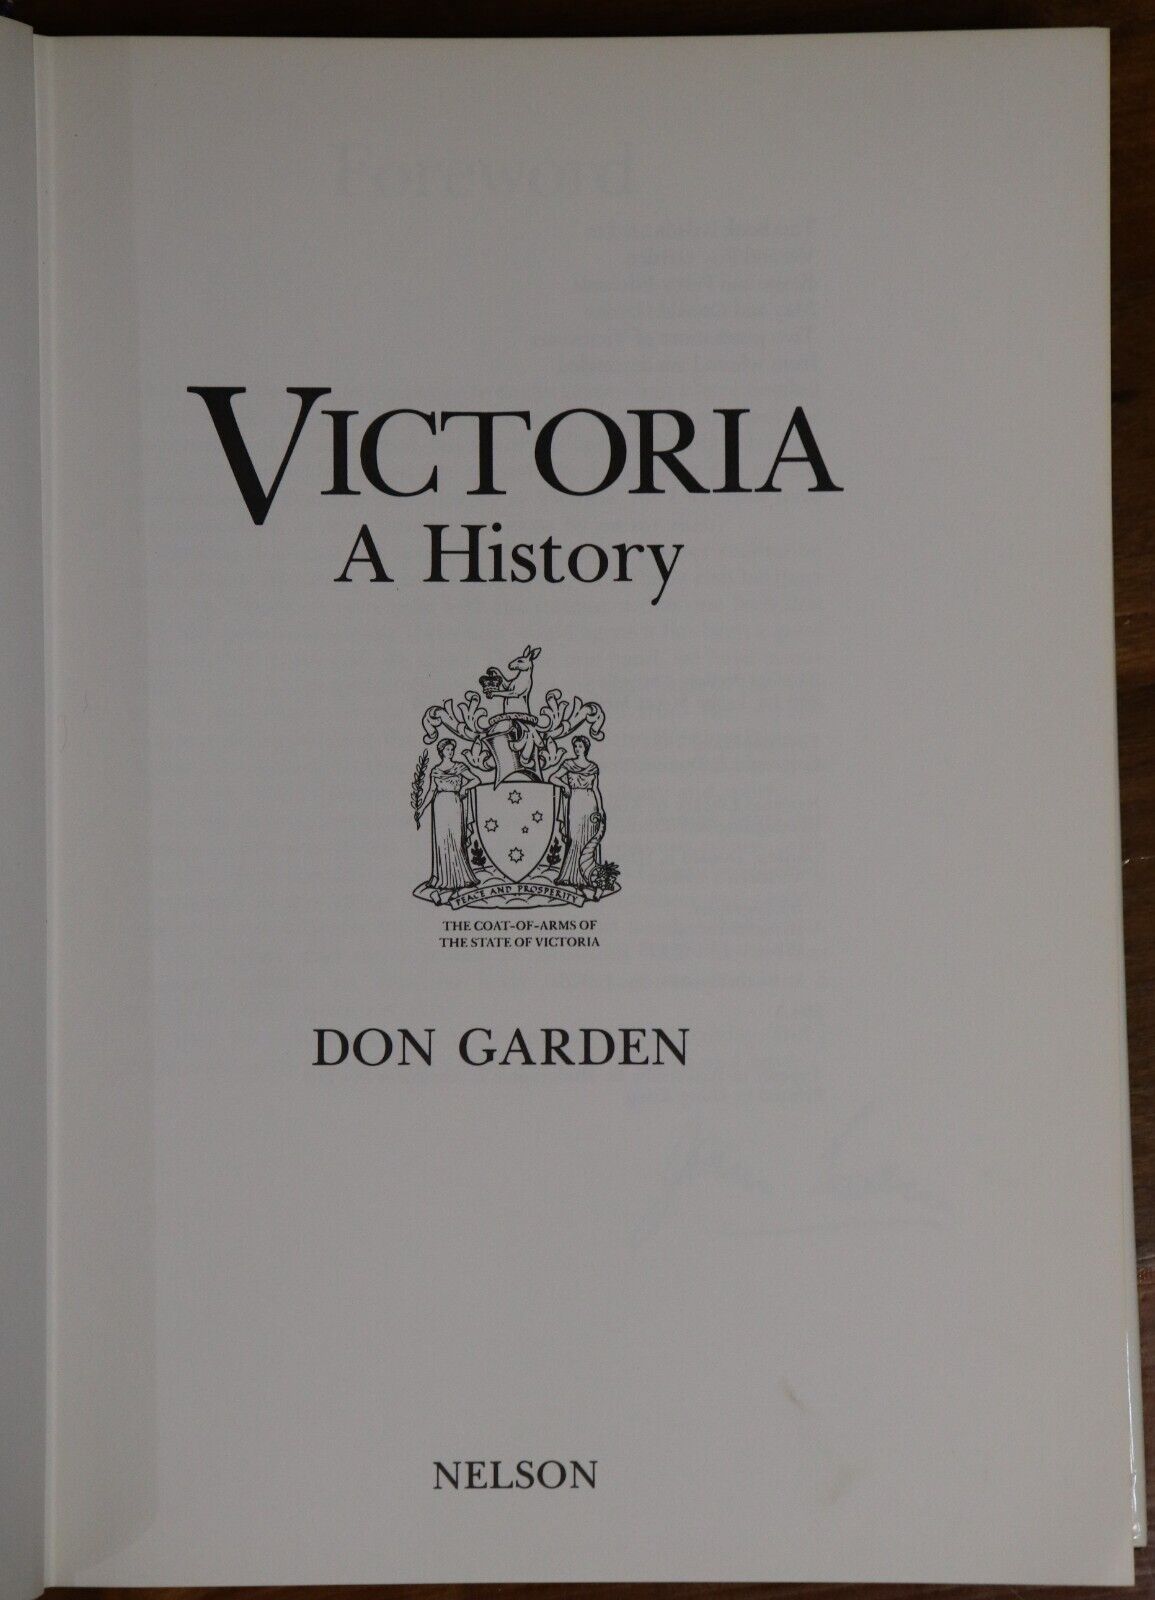 Victoria: A History by Don Garden - 1984 - 1st Edition Australian History Book